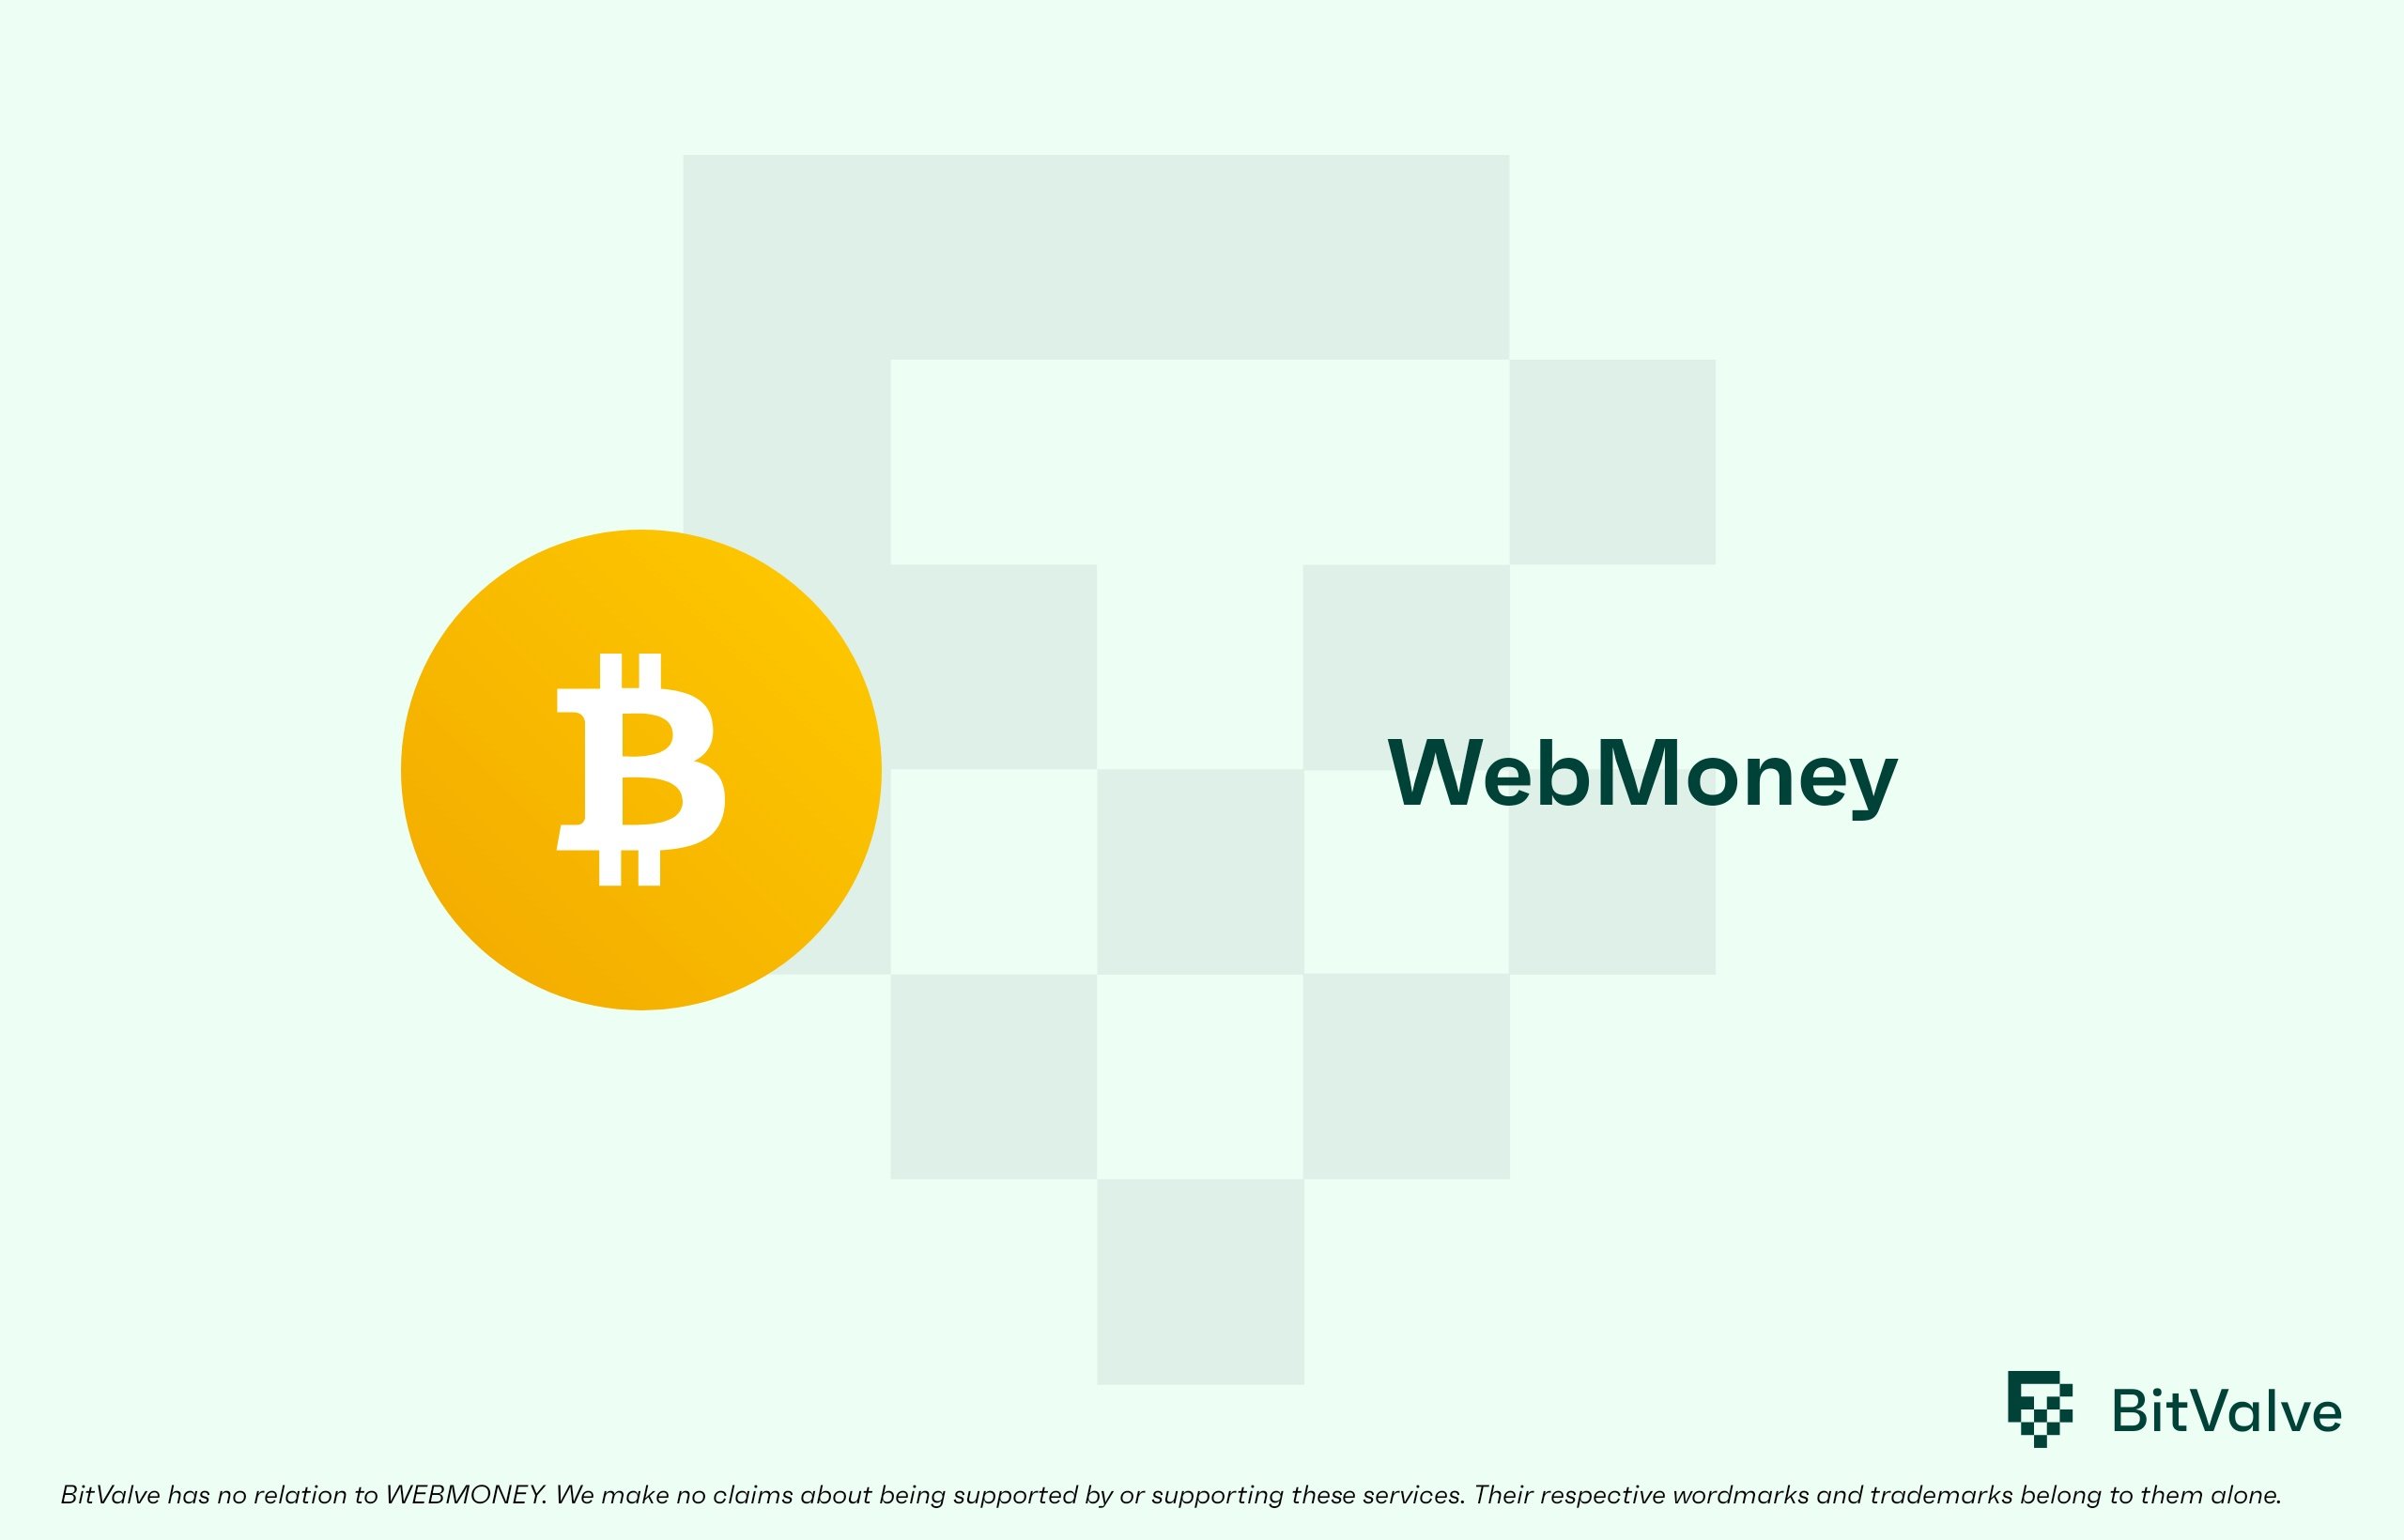 Bitcoin - buying, selling and exchange for WebMoney (WMX)